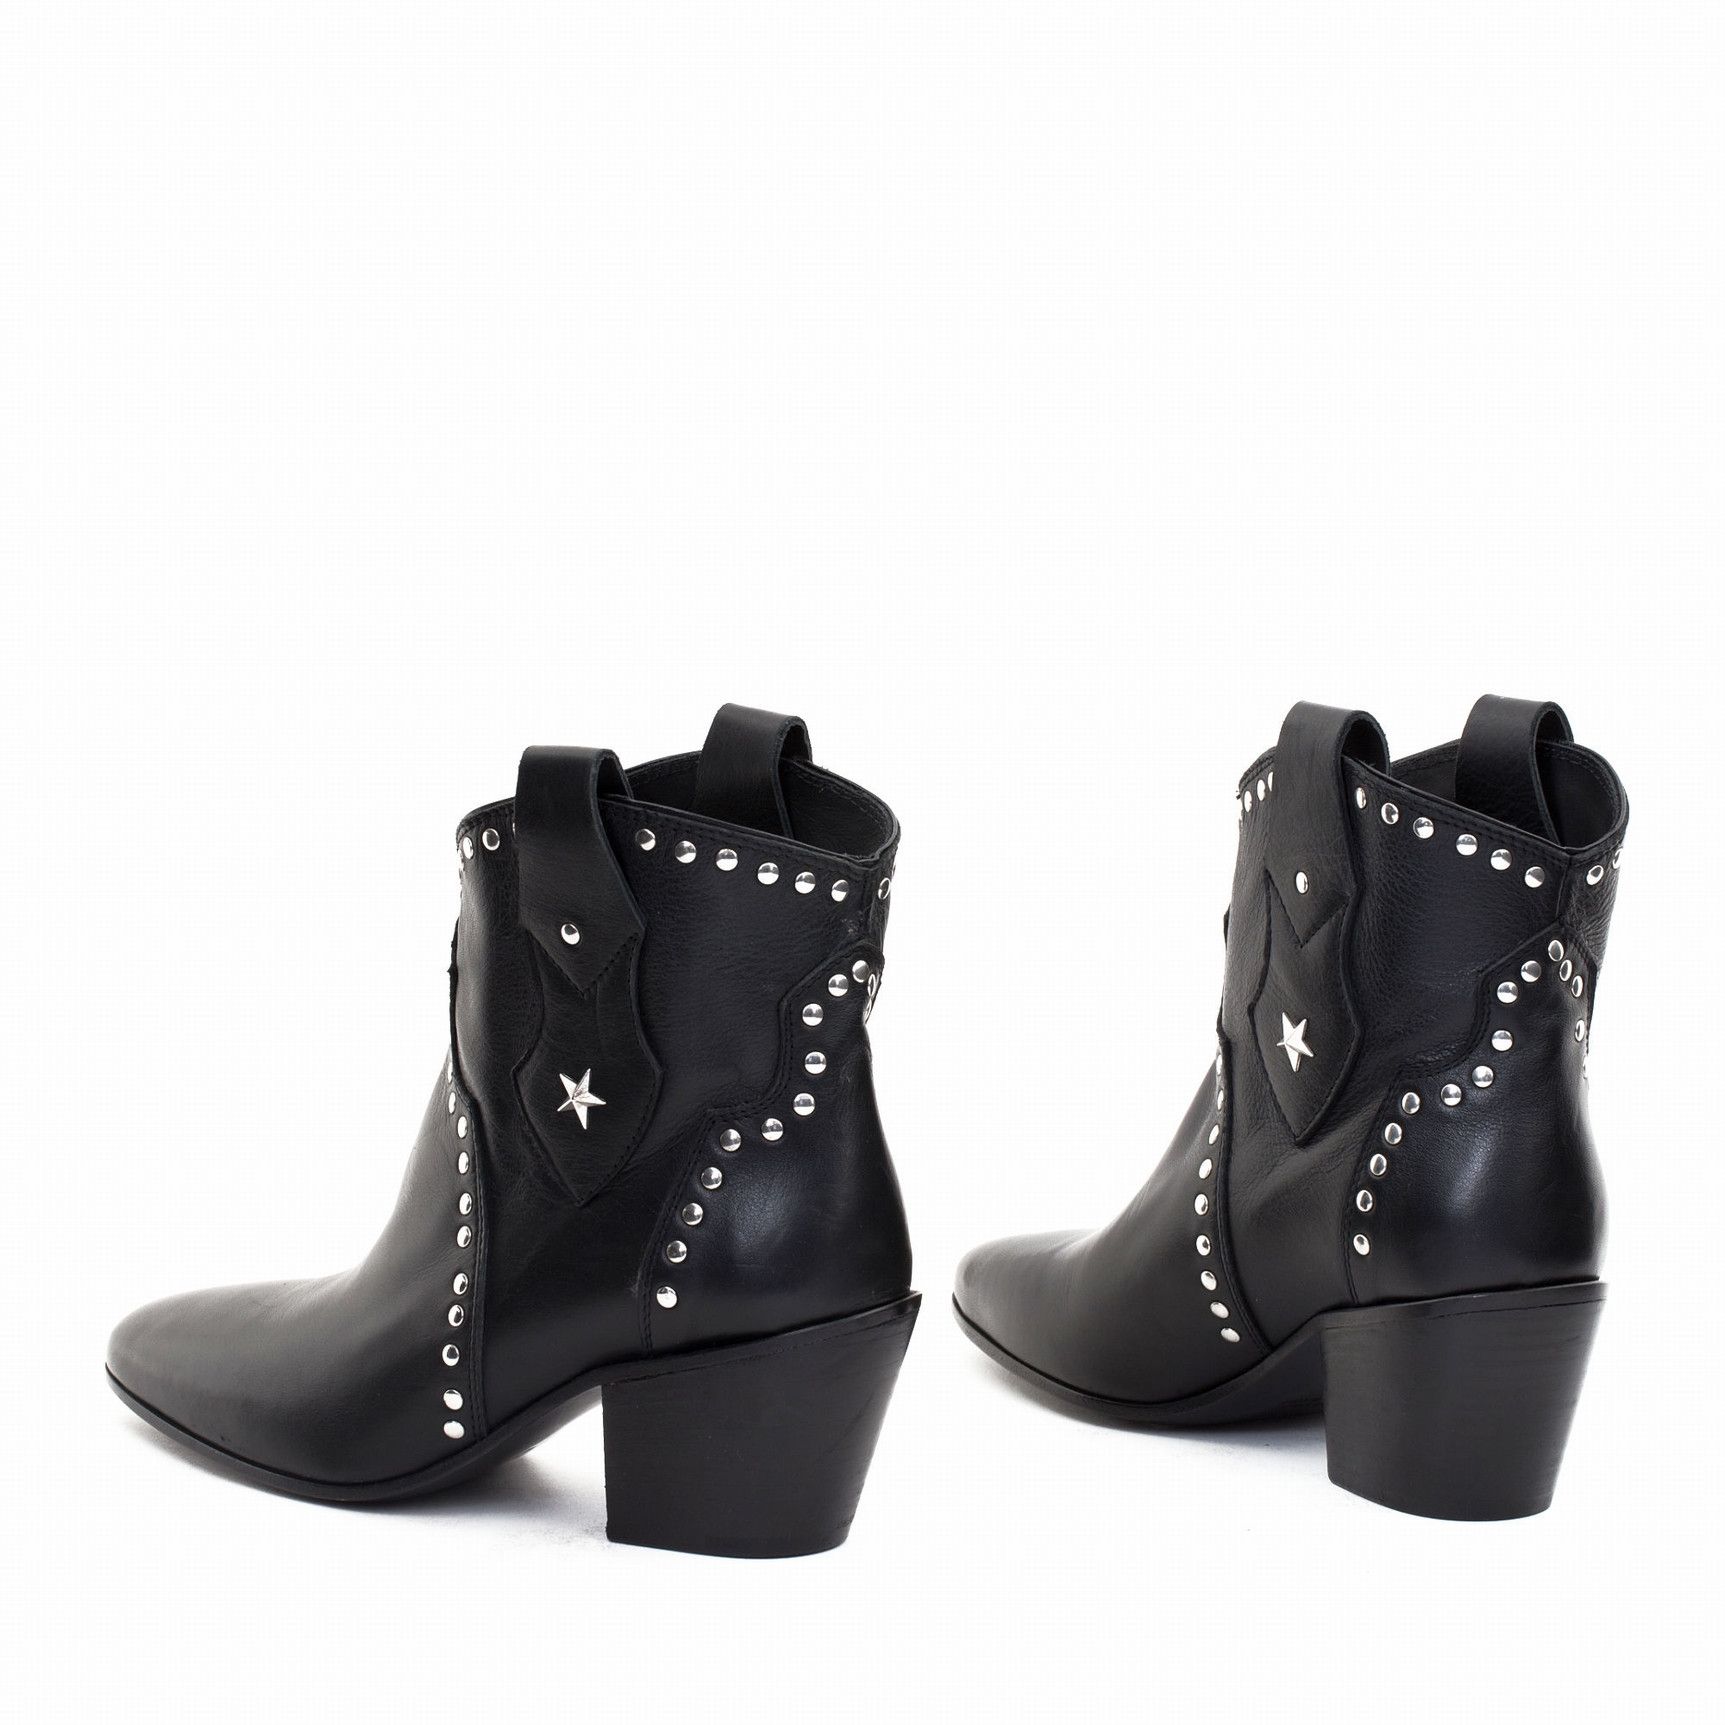 YAMA BUFFALO BLACK SQUARED TOE ANKLE BOOTS   WITH STUDS   Total heel height 2.8 Inches  Color black  Leather sole  Leather heel 